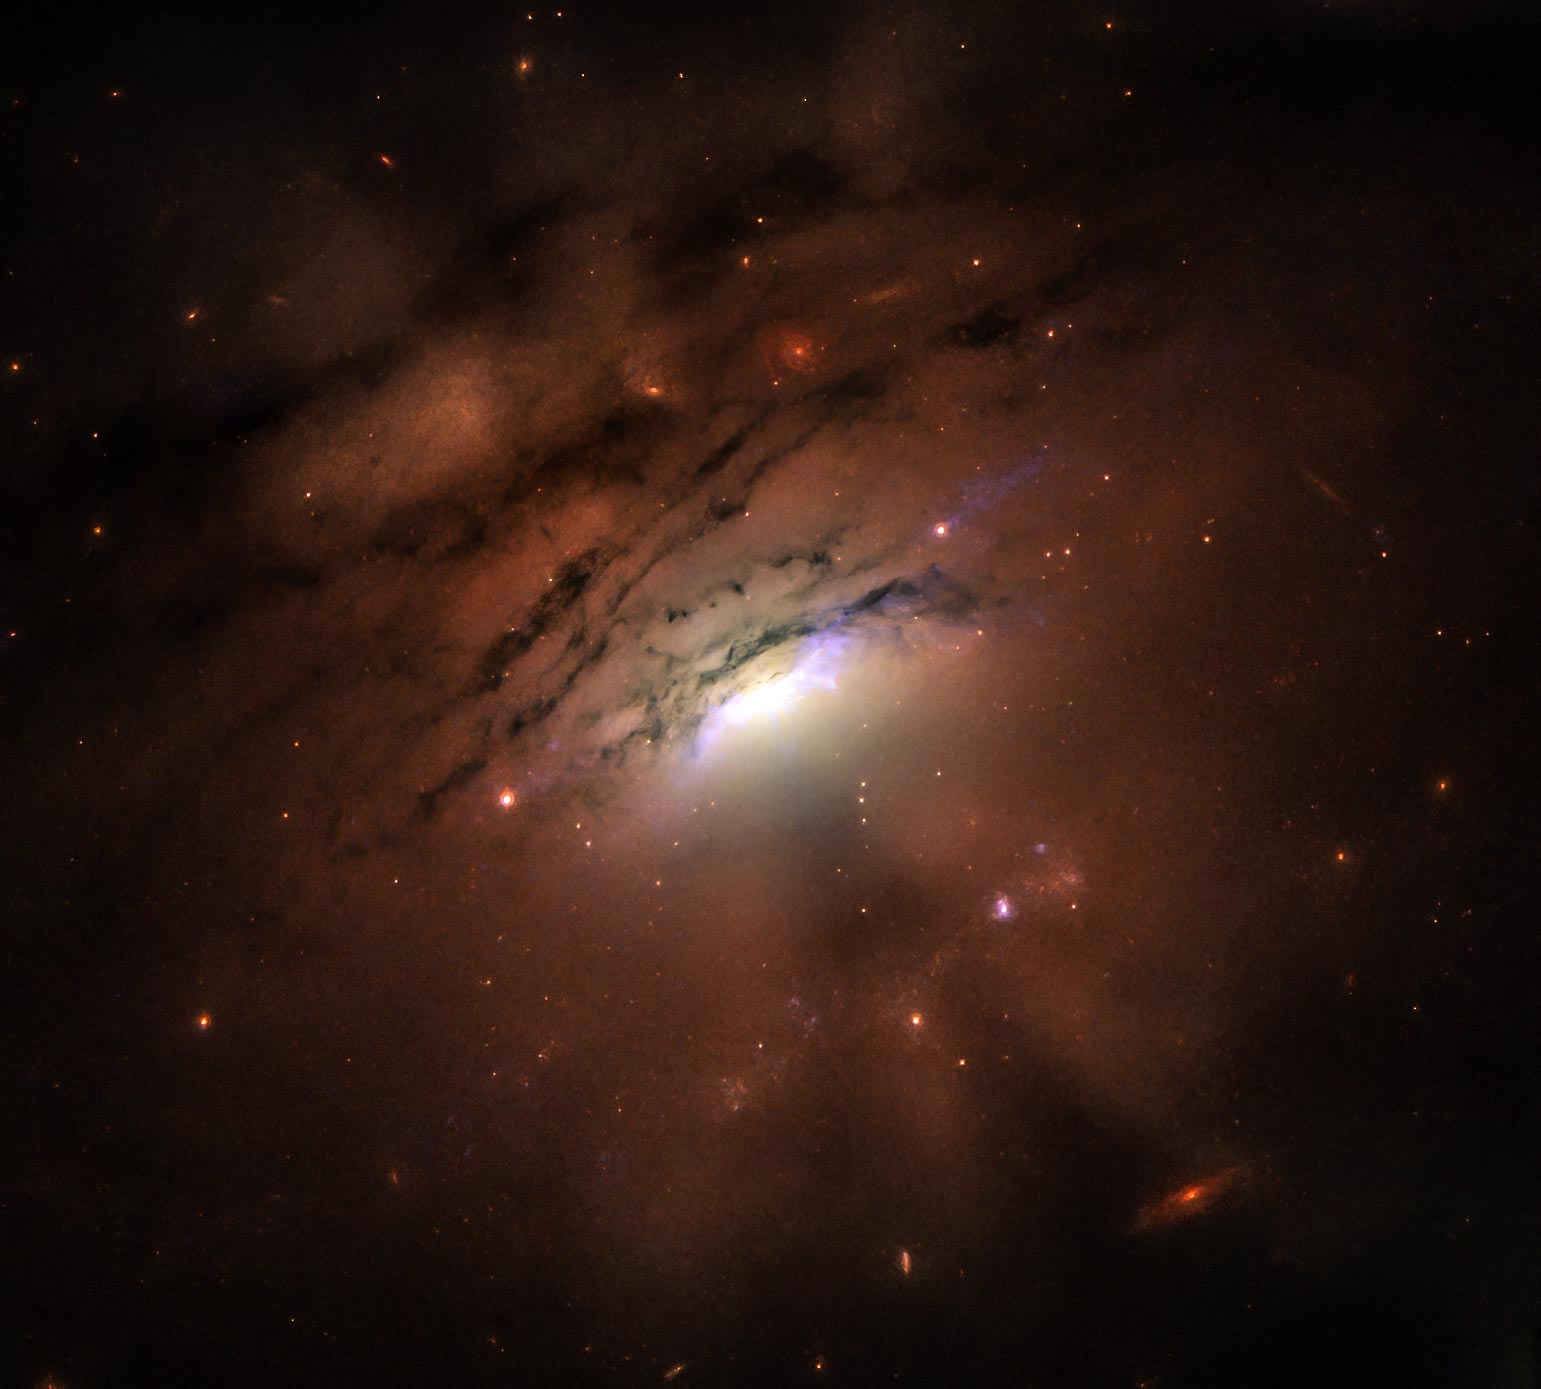 Supermassive Black Hole’s dust ring can cast shadows from the heart of a galaxy